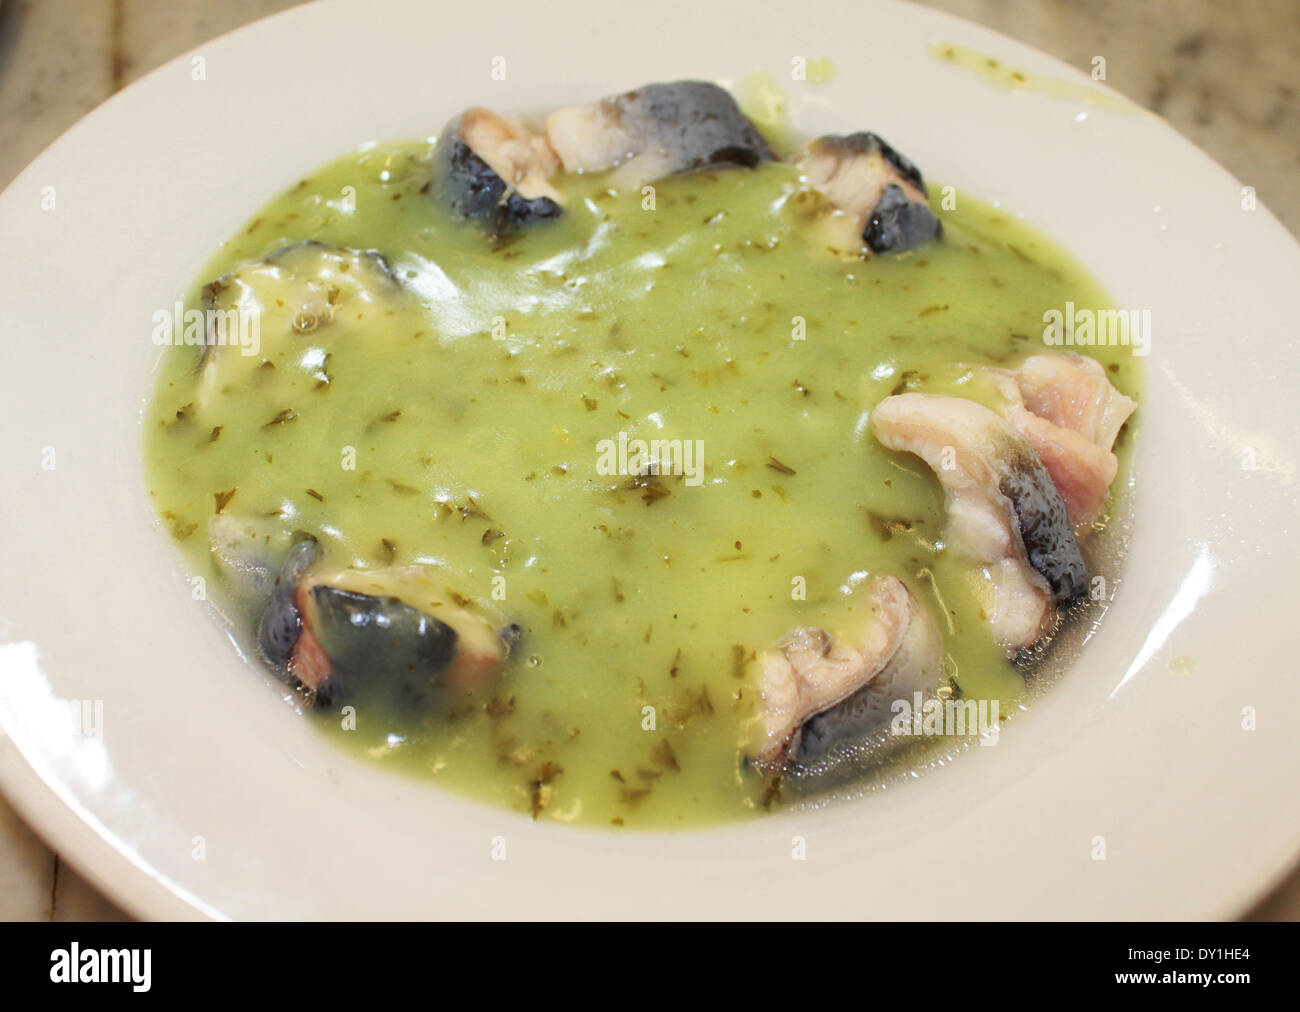 http://c8.alamy.com/comp/DY1HE4/jellied-eels-with-eel-liquor-sauce-or-parsley-sauce-at-m-manze-pie-DY1HE4.jpg